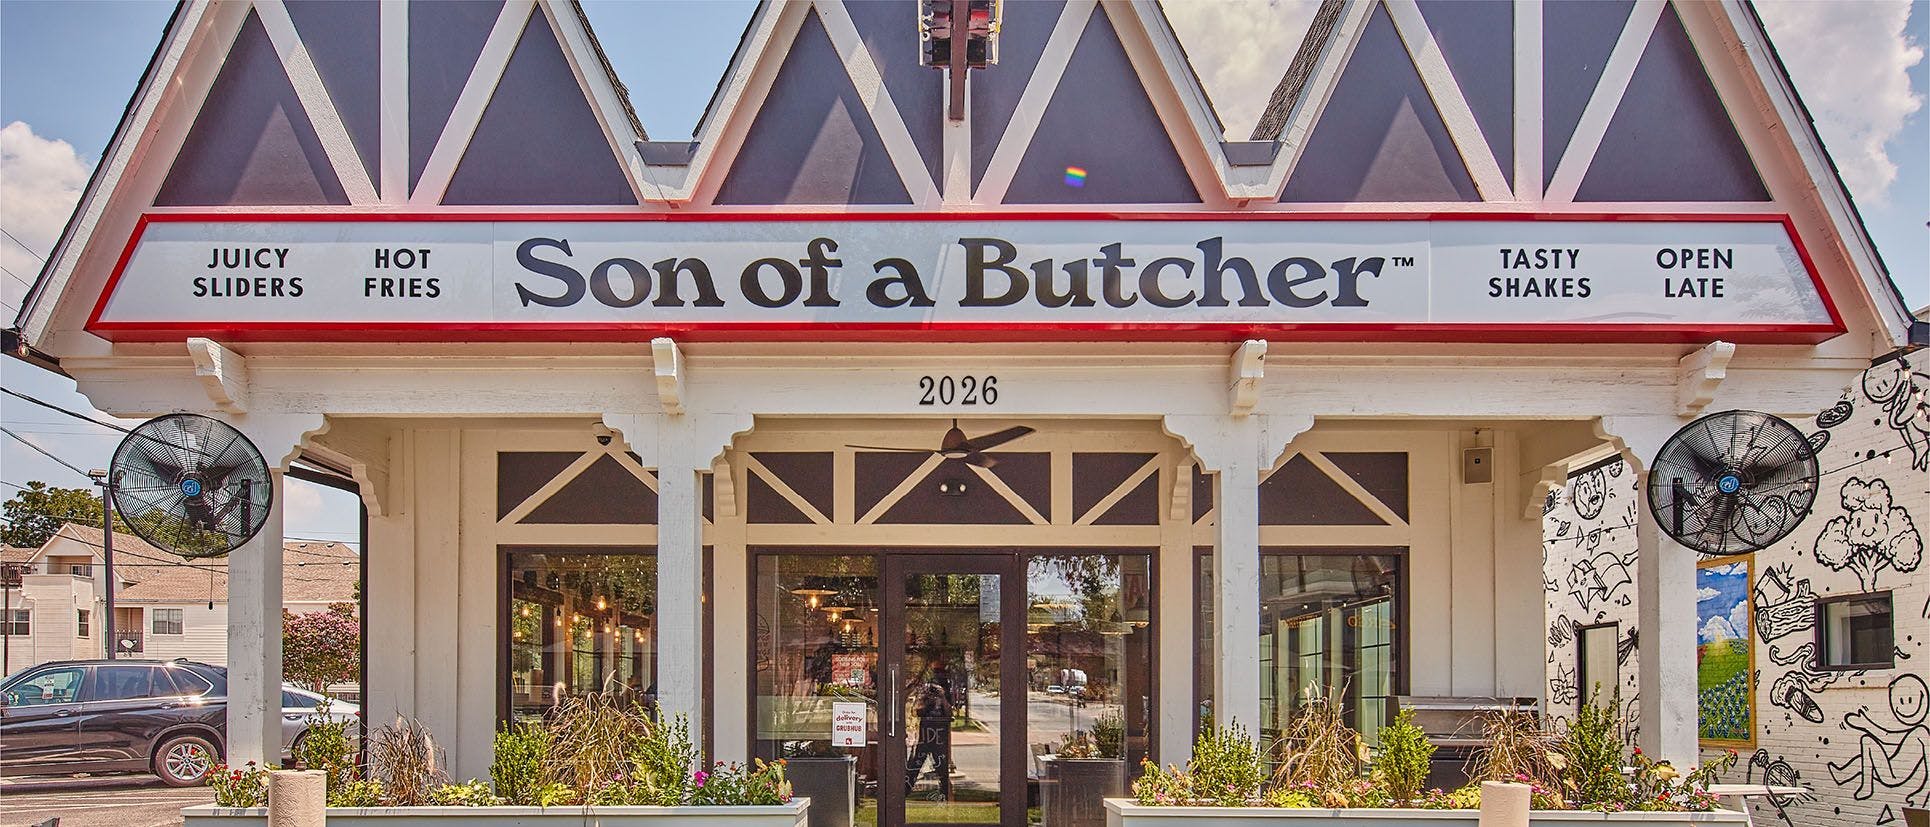 Franchise a Son of a Butcher location